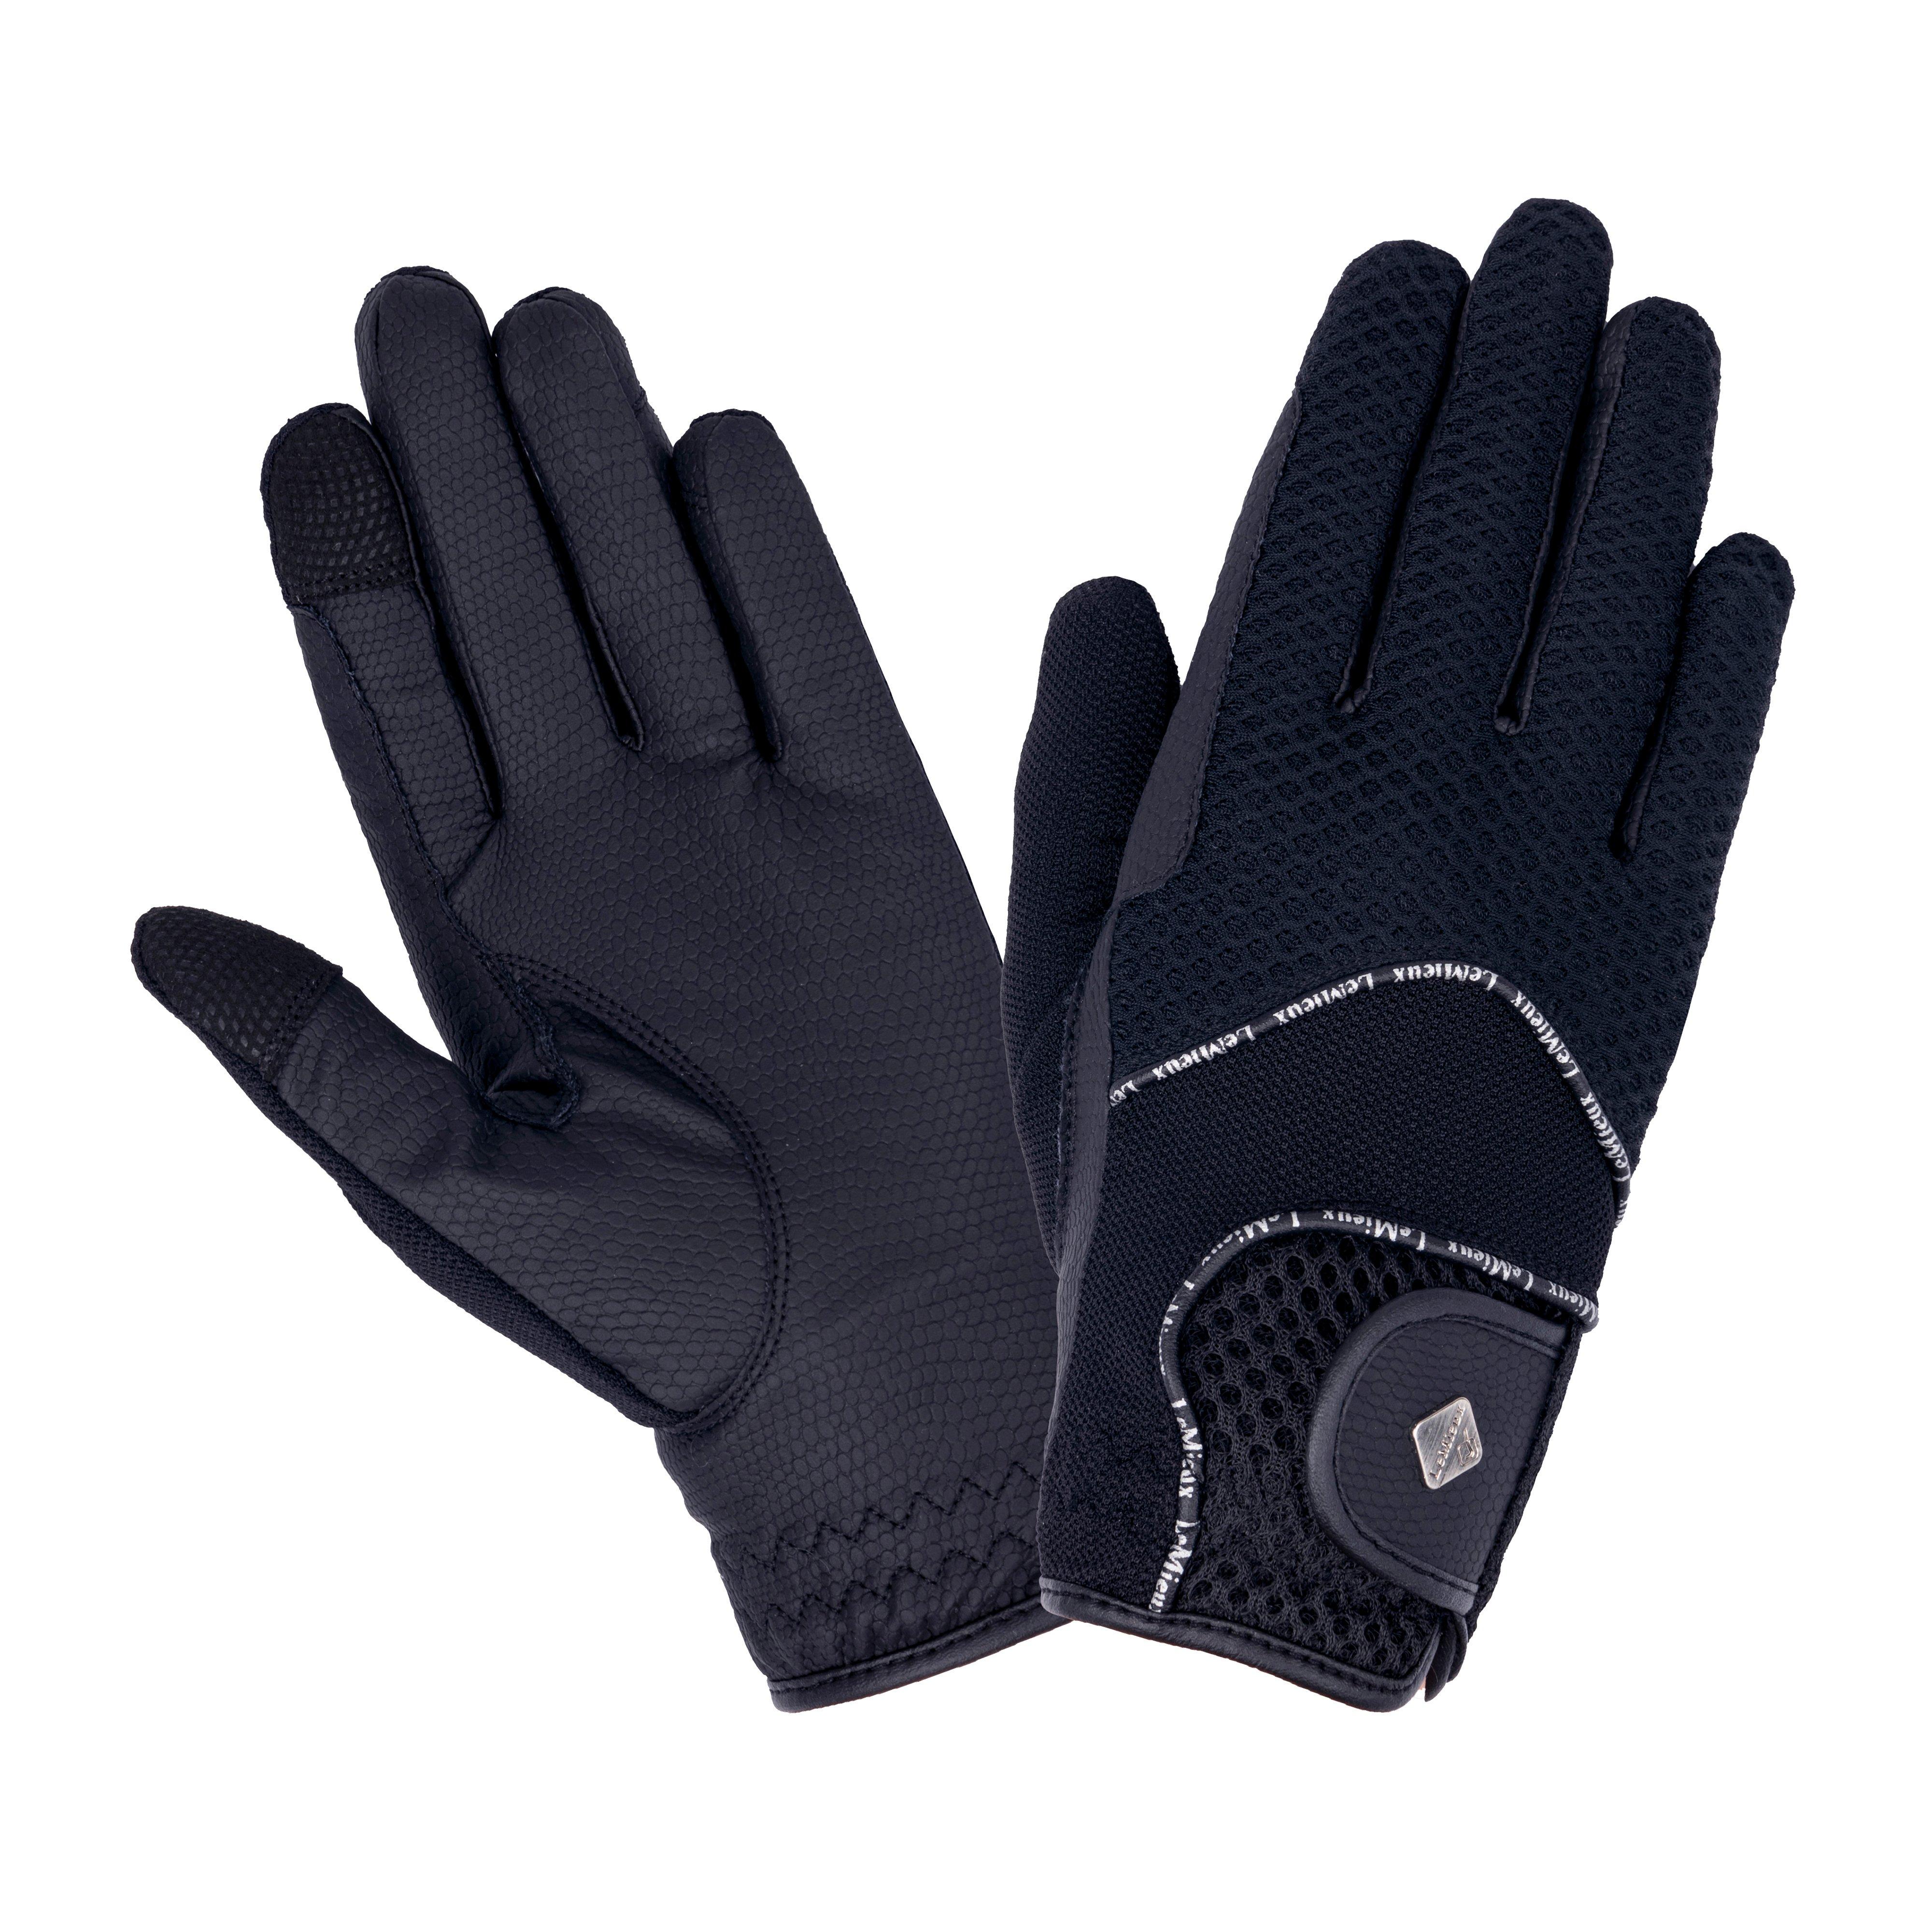 Pro Touch 3D Mesh Riding Gloves Navy